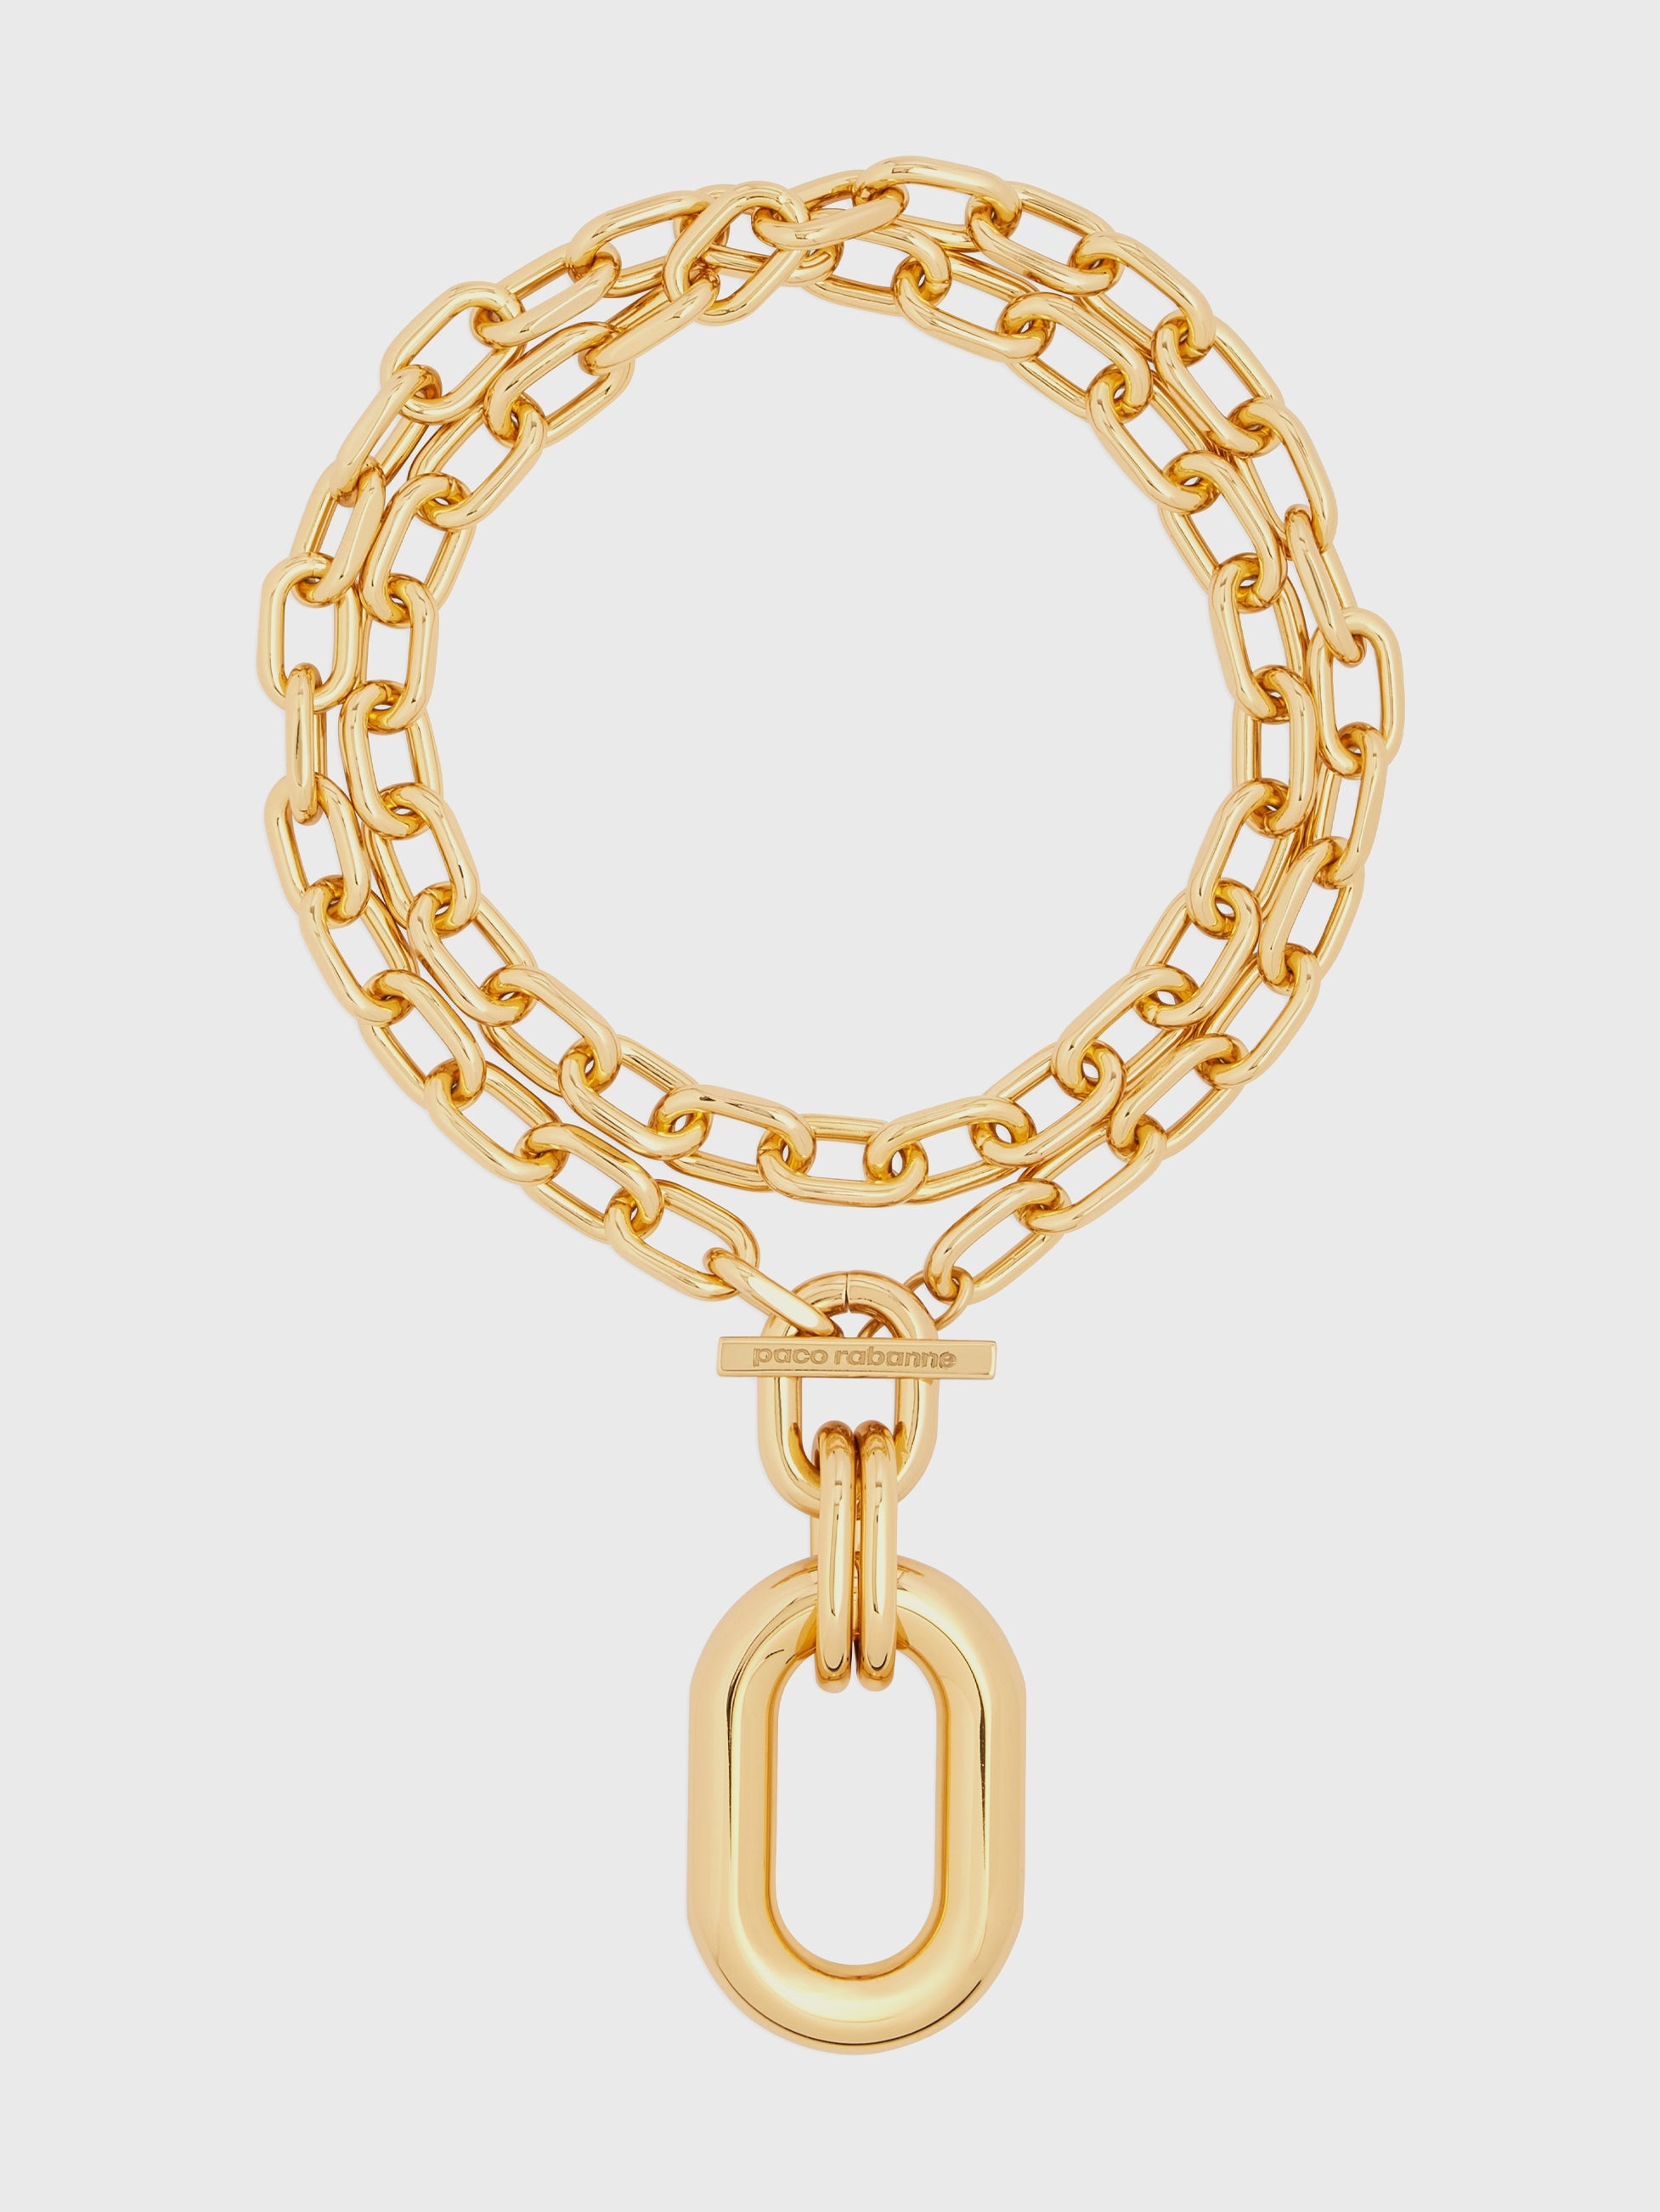 GOLD DOUBLE XL LINK NECKLACE WITH PENDANT - 1